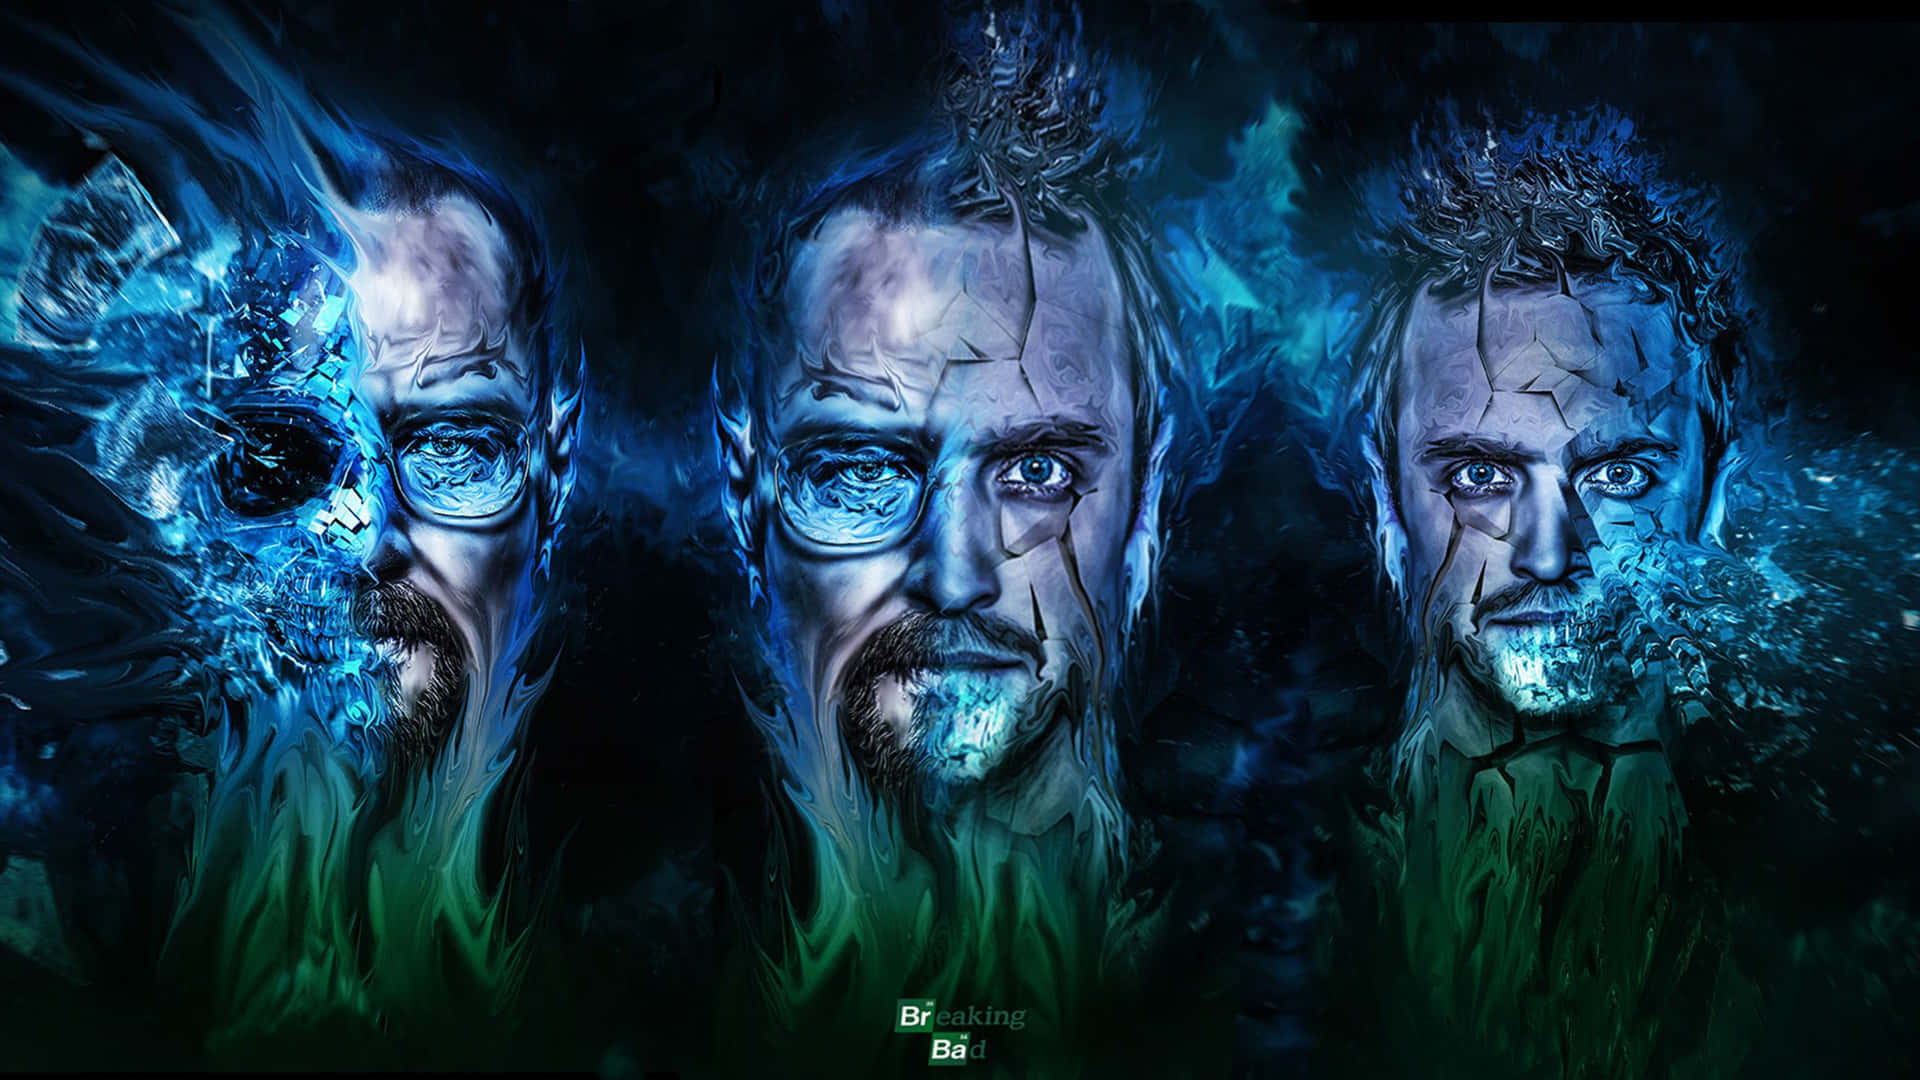 Enter the world of “Breaking Bad”